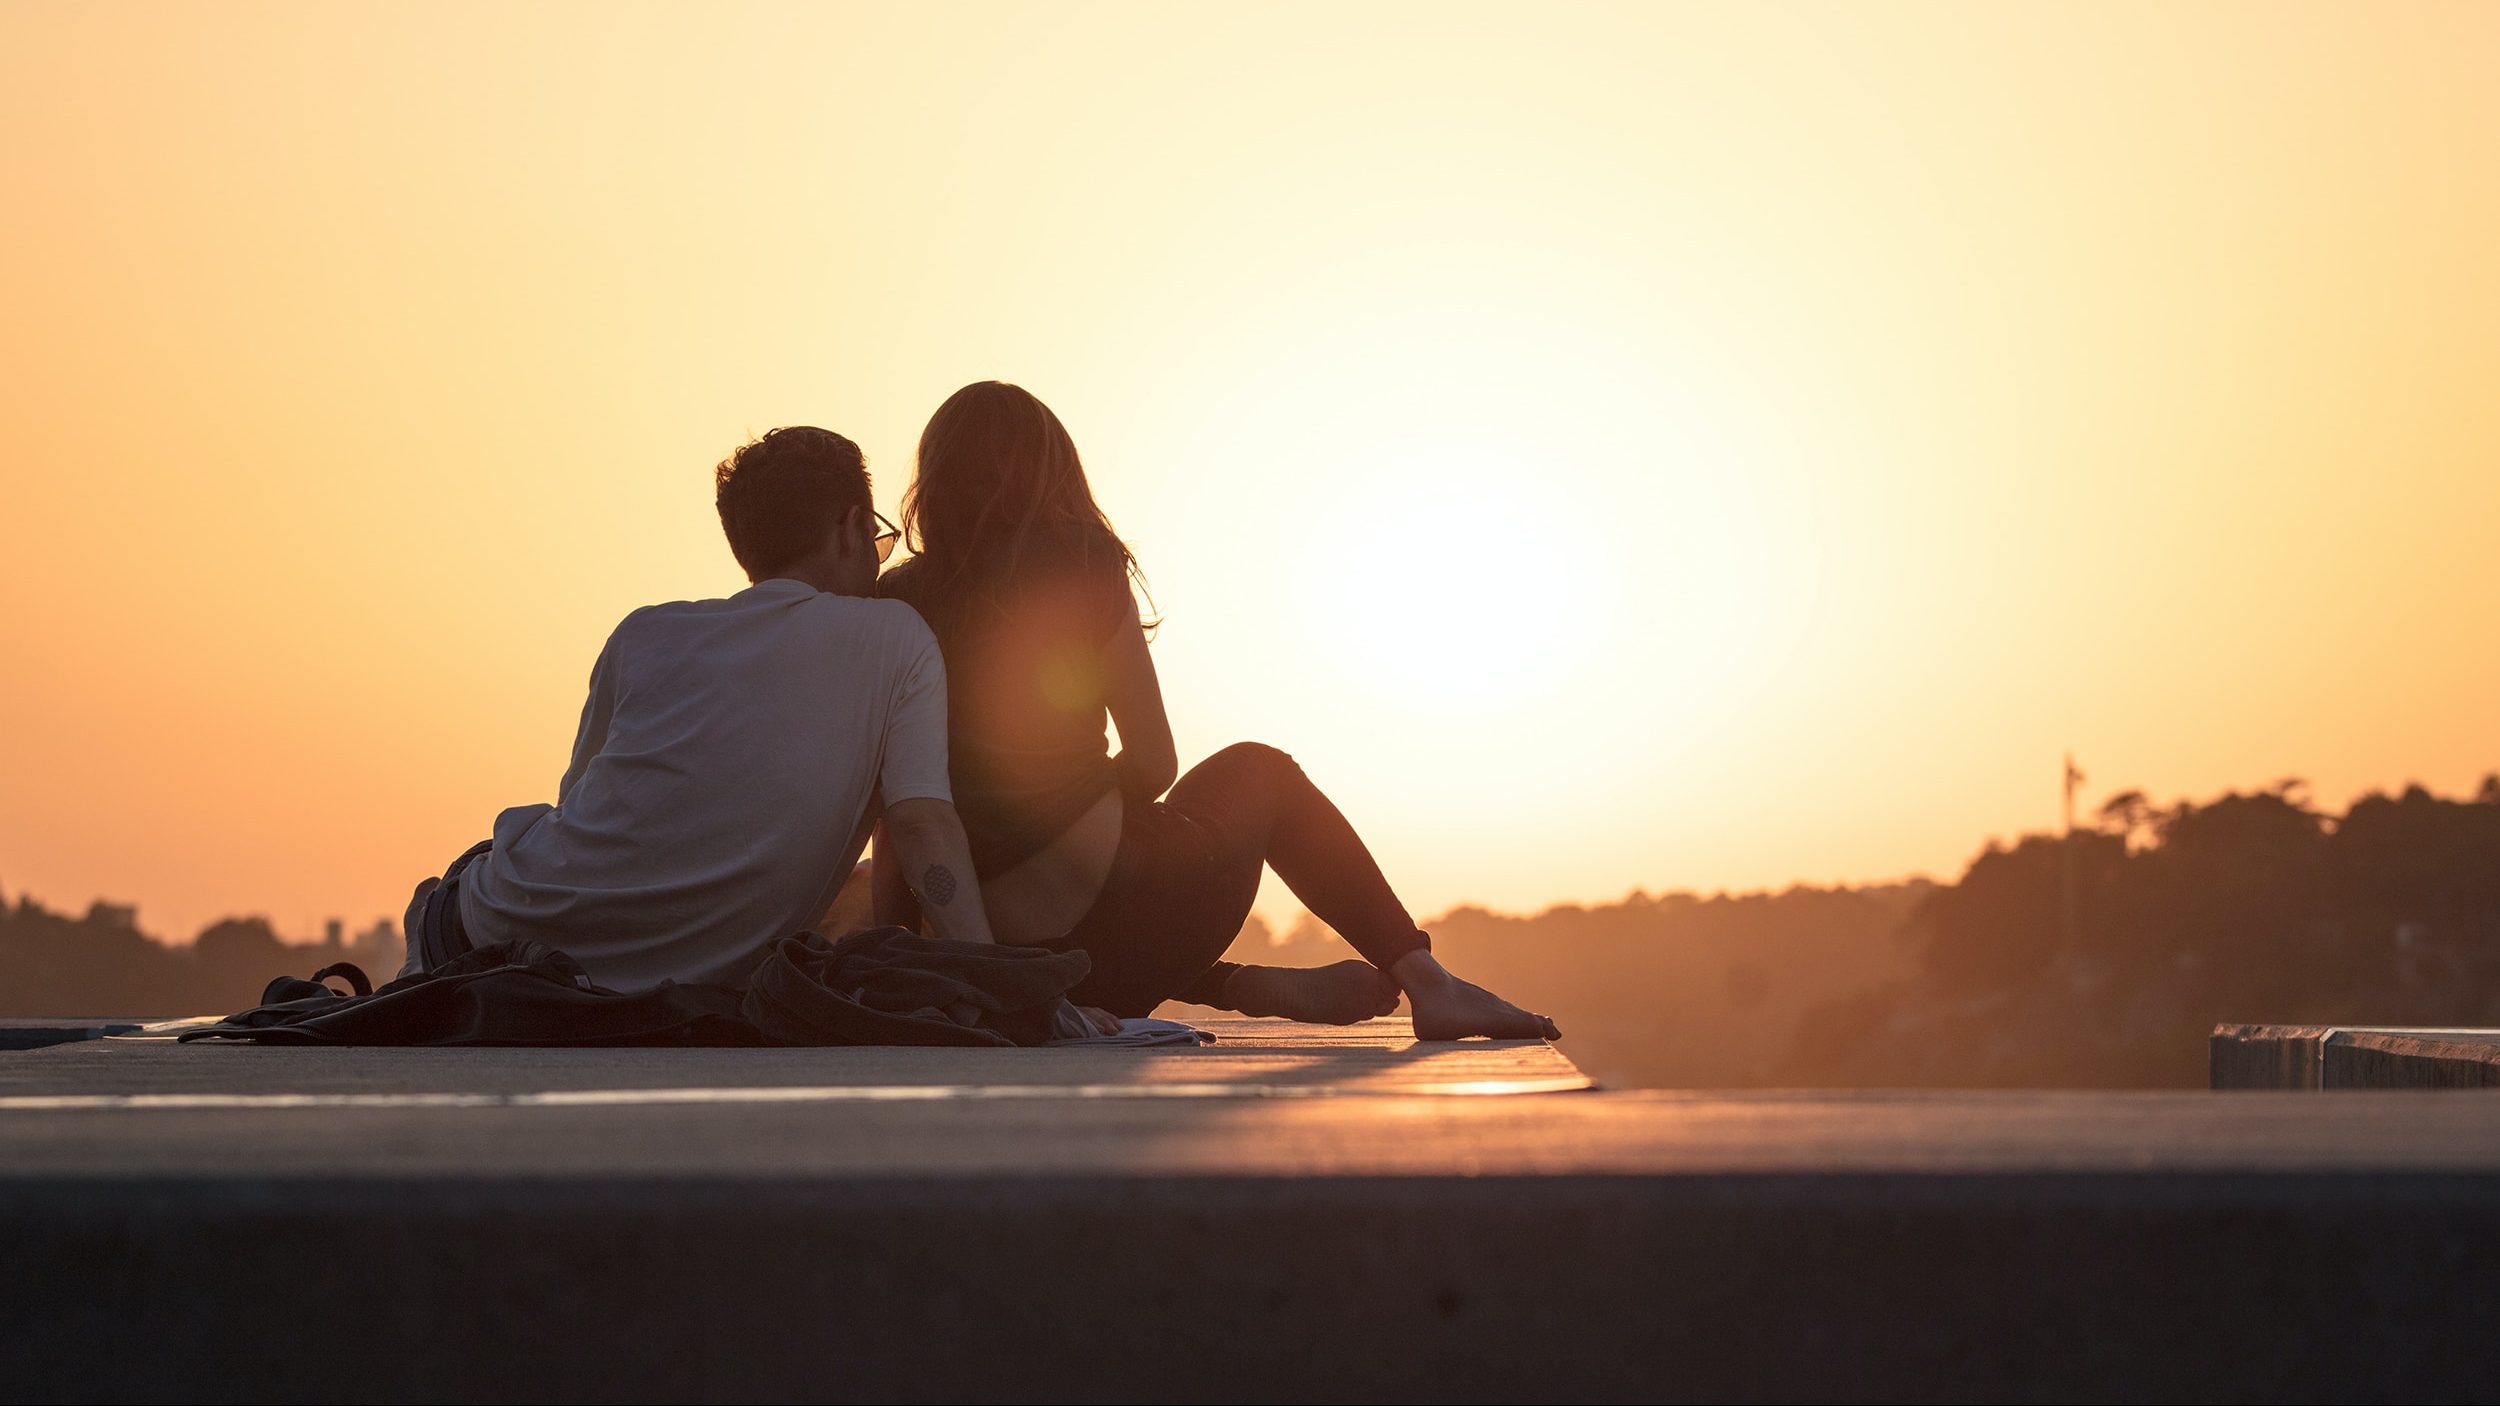 A man and a woman sitting on a ledge at sunset.